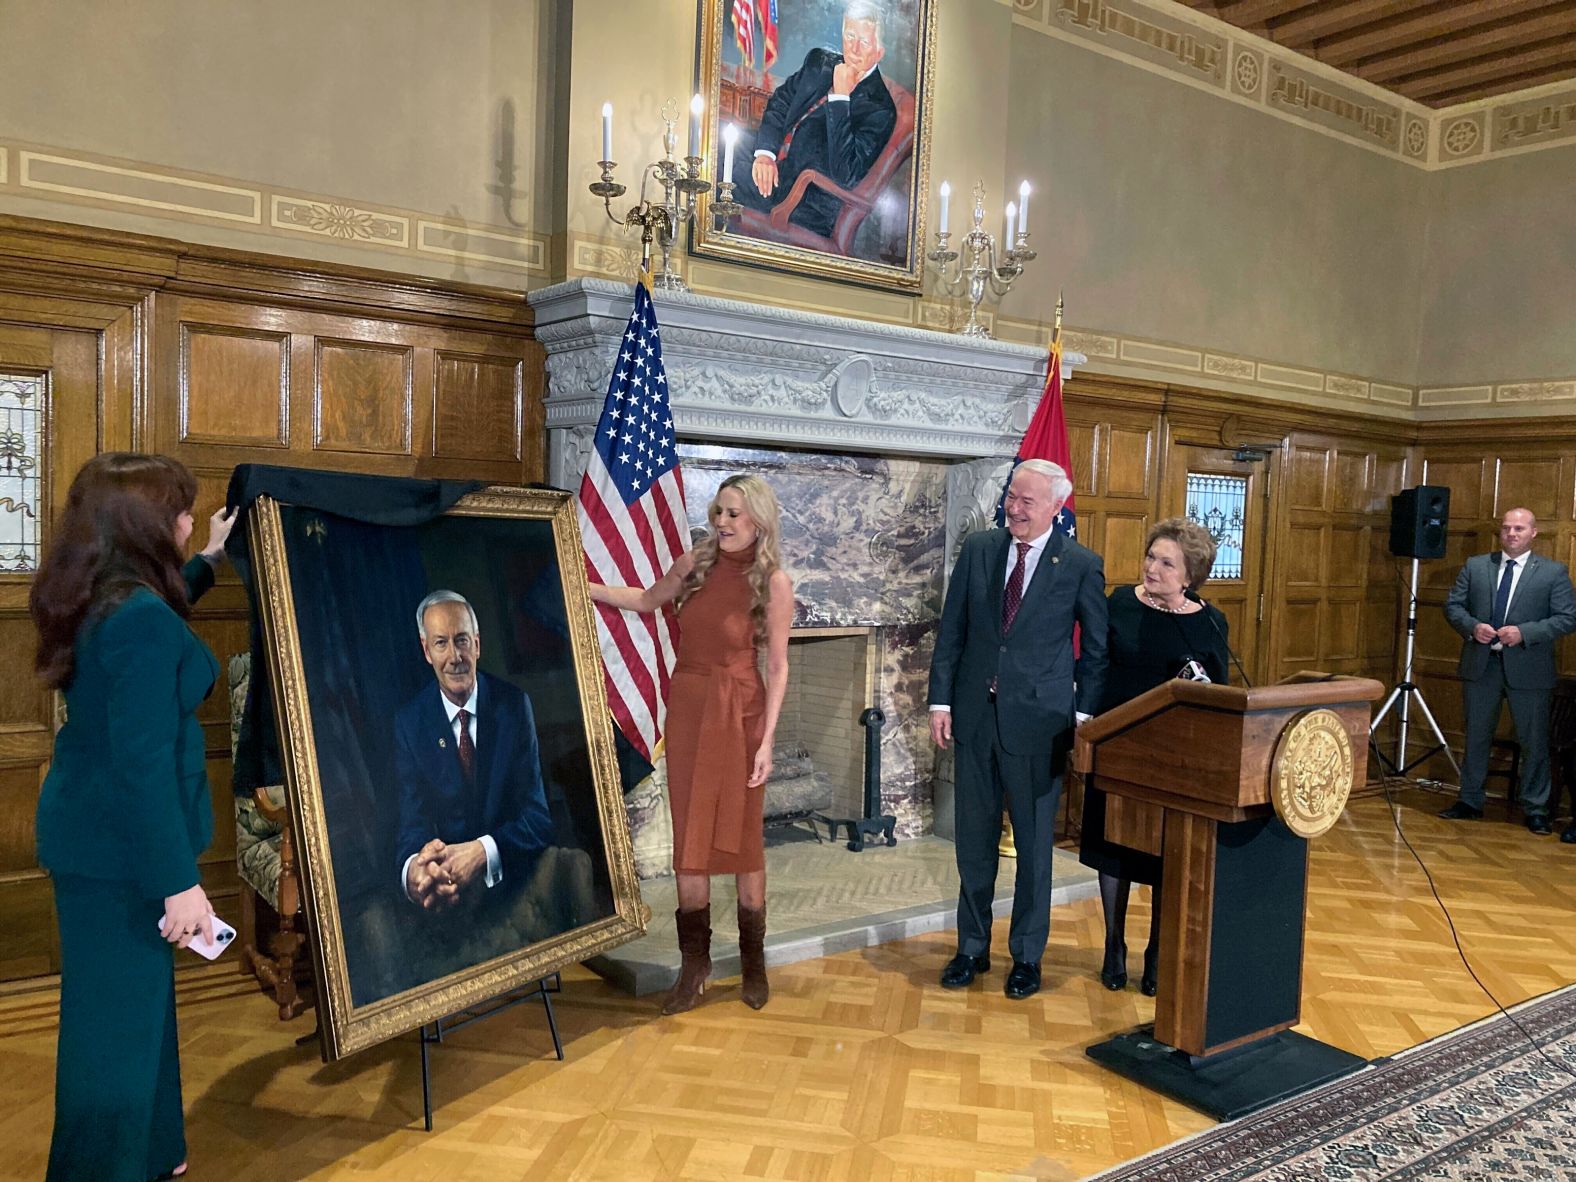 Hutchinson and his wife, Susan, watch as their granddaughter, Jaella Wengel, left, and daughter, Sarah Wengel, unveil his official portrait at the State Capitol in January 2023.